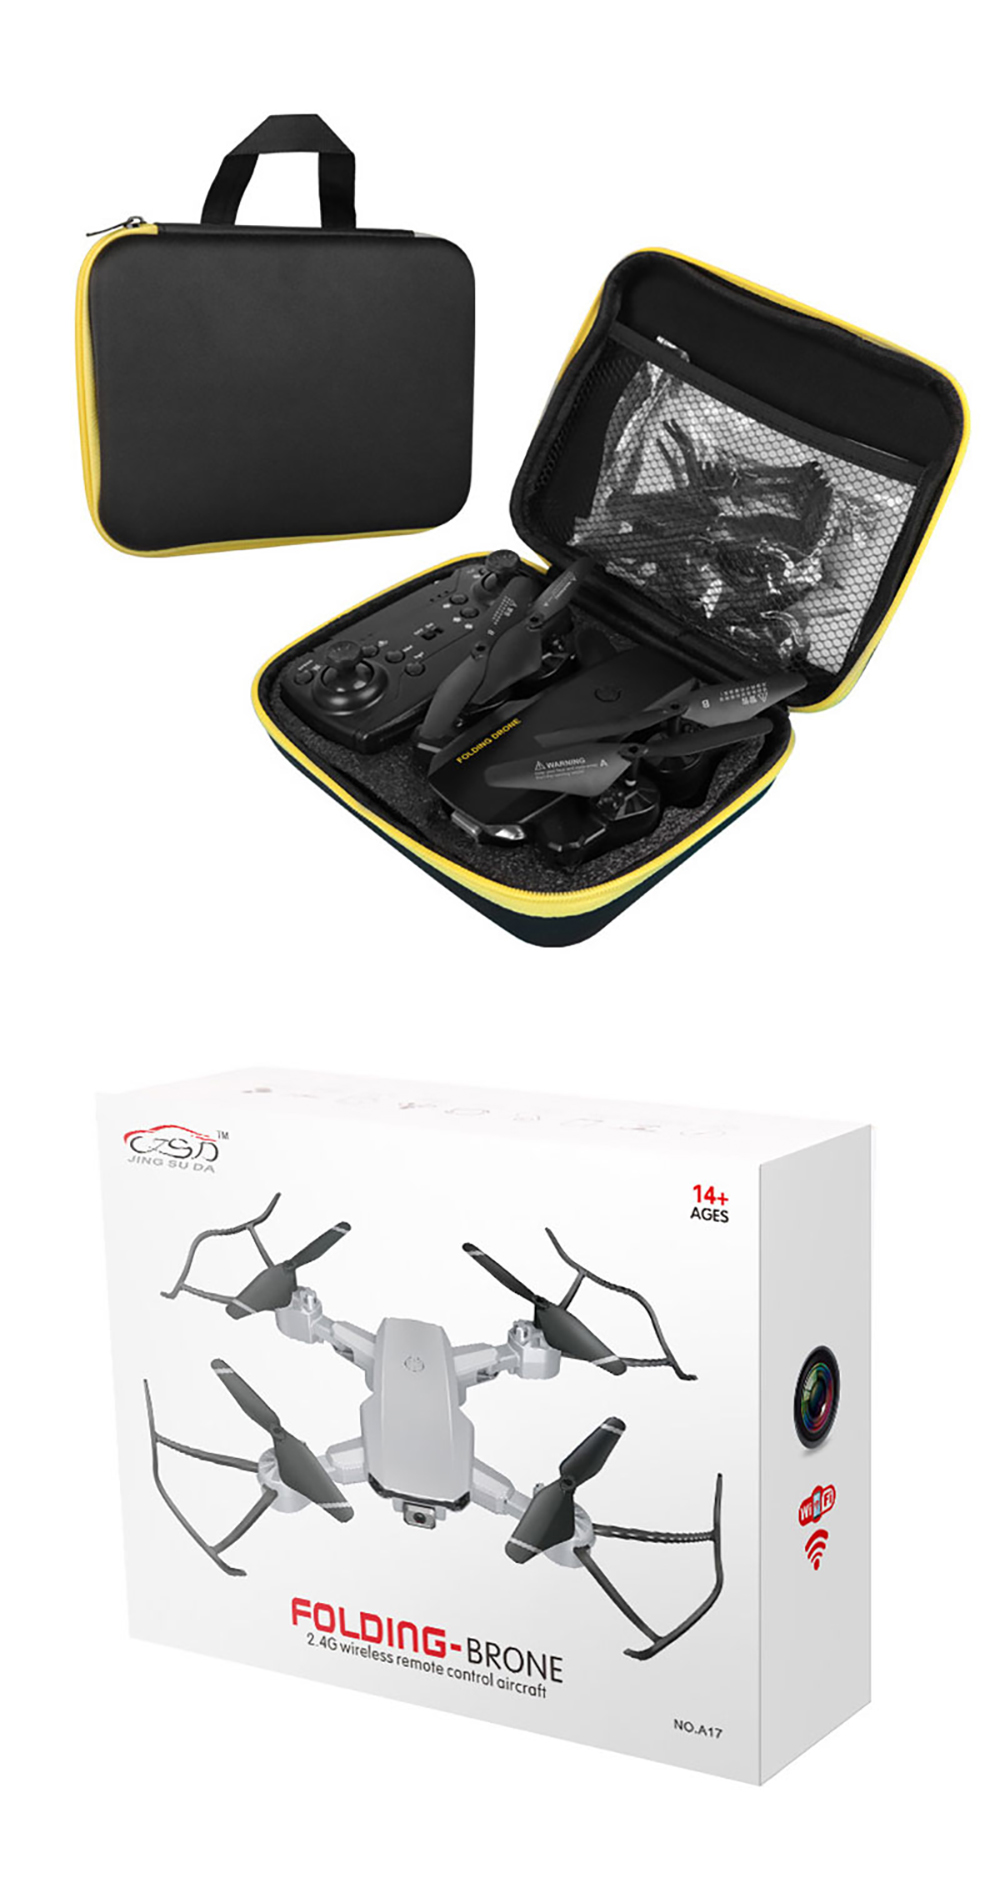 S60-Mini-Drone-WIFI-FPV-with-4K-HD-Camera-Optical-Flow-Positioning-15mins-Flight-Time-Foldable-RC-Qu-1775566-9